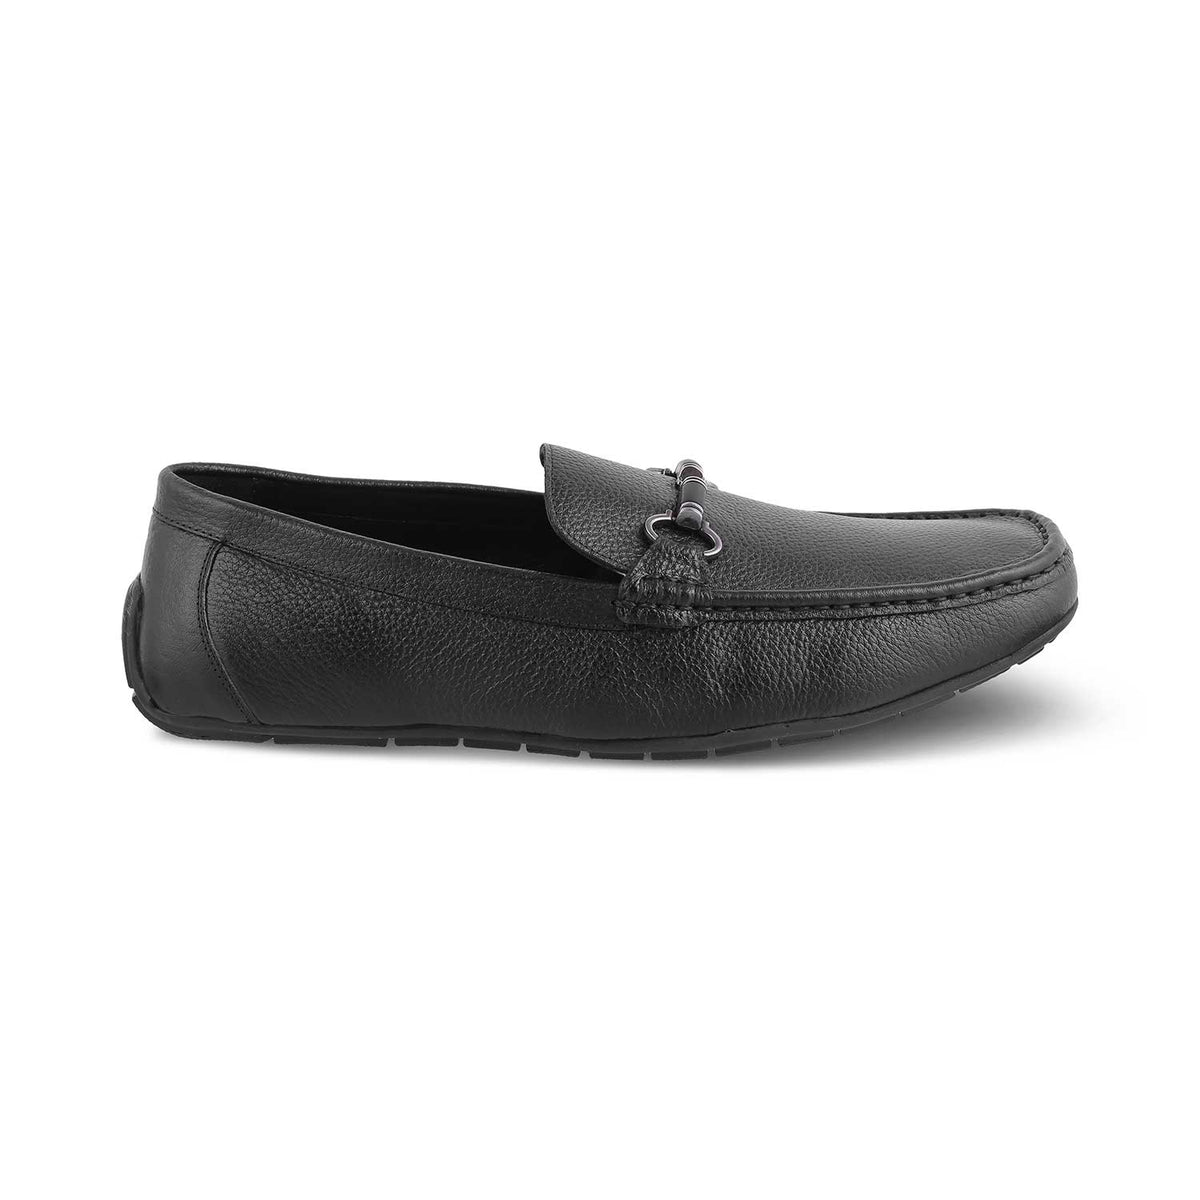 The Robuk Black Men's Leather Driving Loafers Tresmode